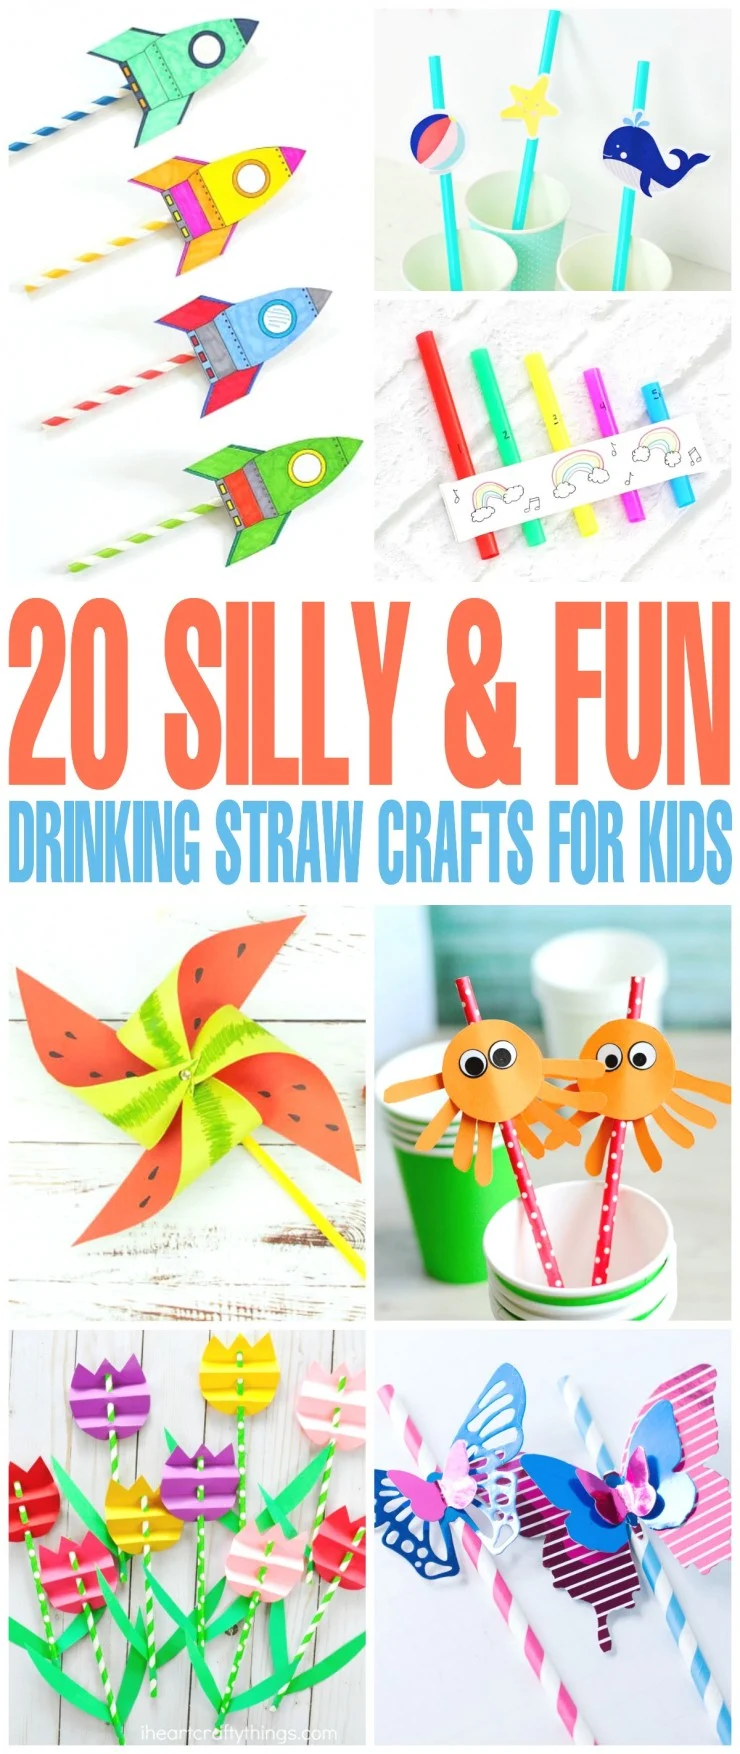 Looking for inexpensive crafts to make with straws? Check out these 20 silly & fun drinking straw crafts kids!